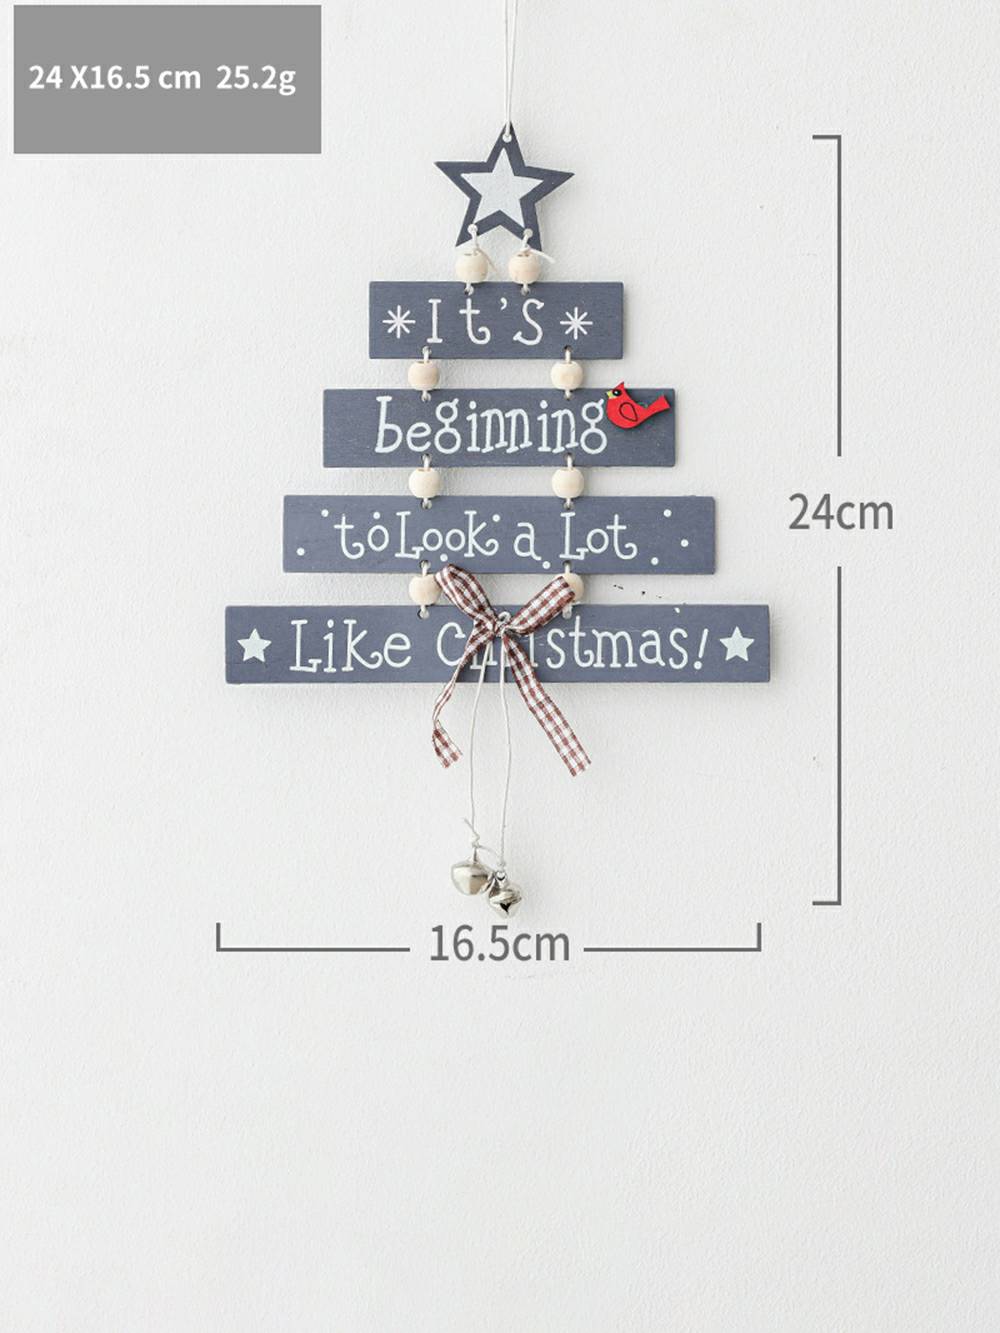 Christmas Tree-Shaped Wooden Hand-Painted Decorative Letter Plaque Ornament